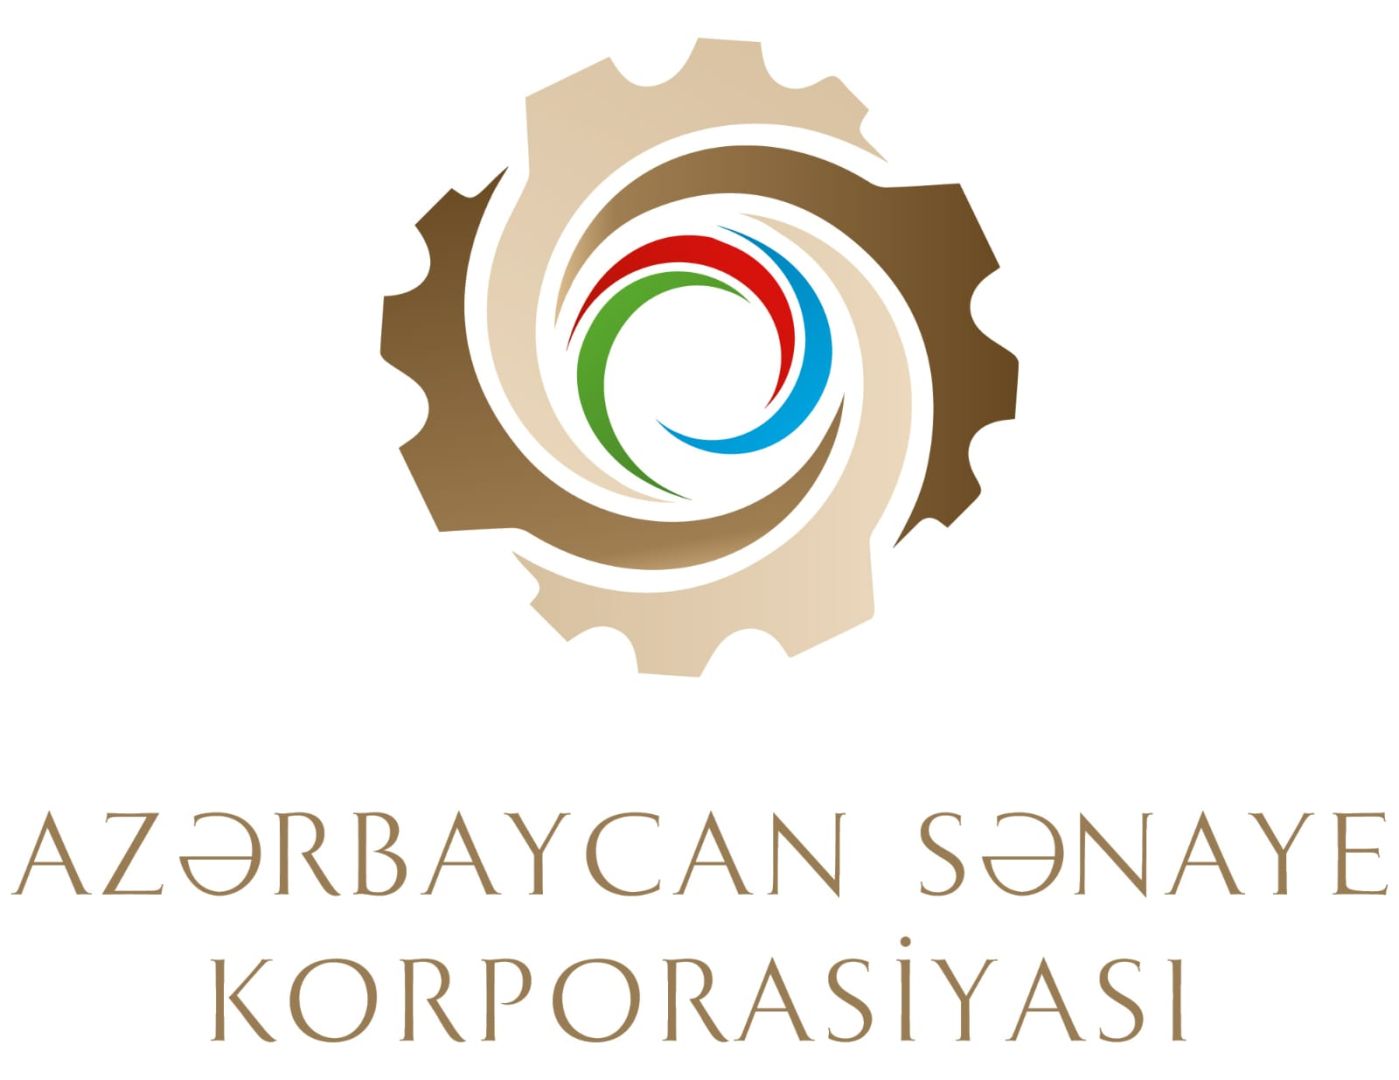 Azerbaijan Industrial Corporation OJSC announces its financial results for 2022